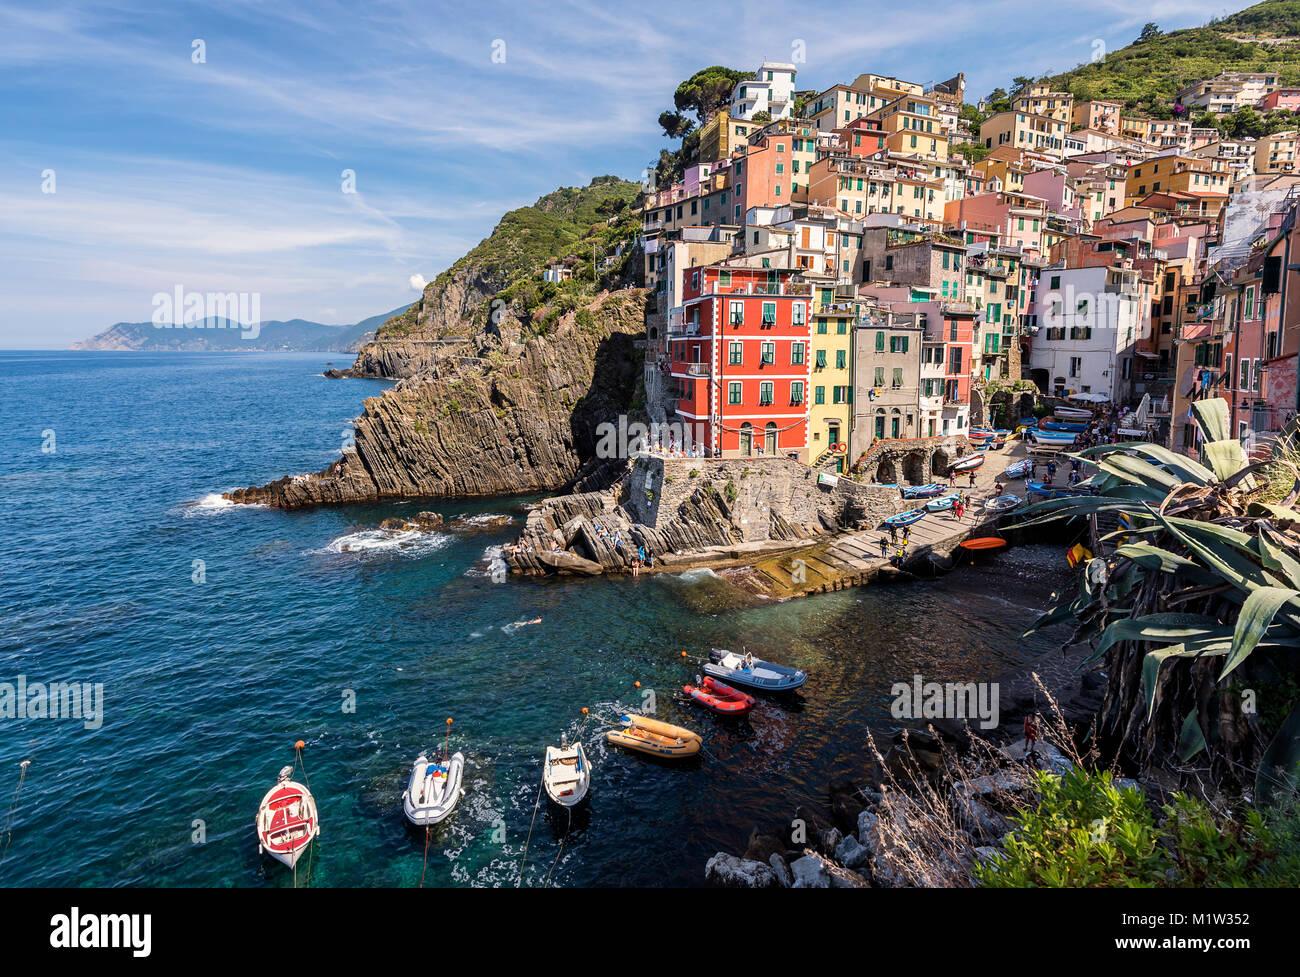 Cinque Terre is a string of centuries-old seaside villages on the rugged Italian Riviera coastline Stock Photo